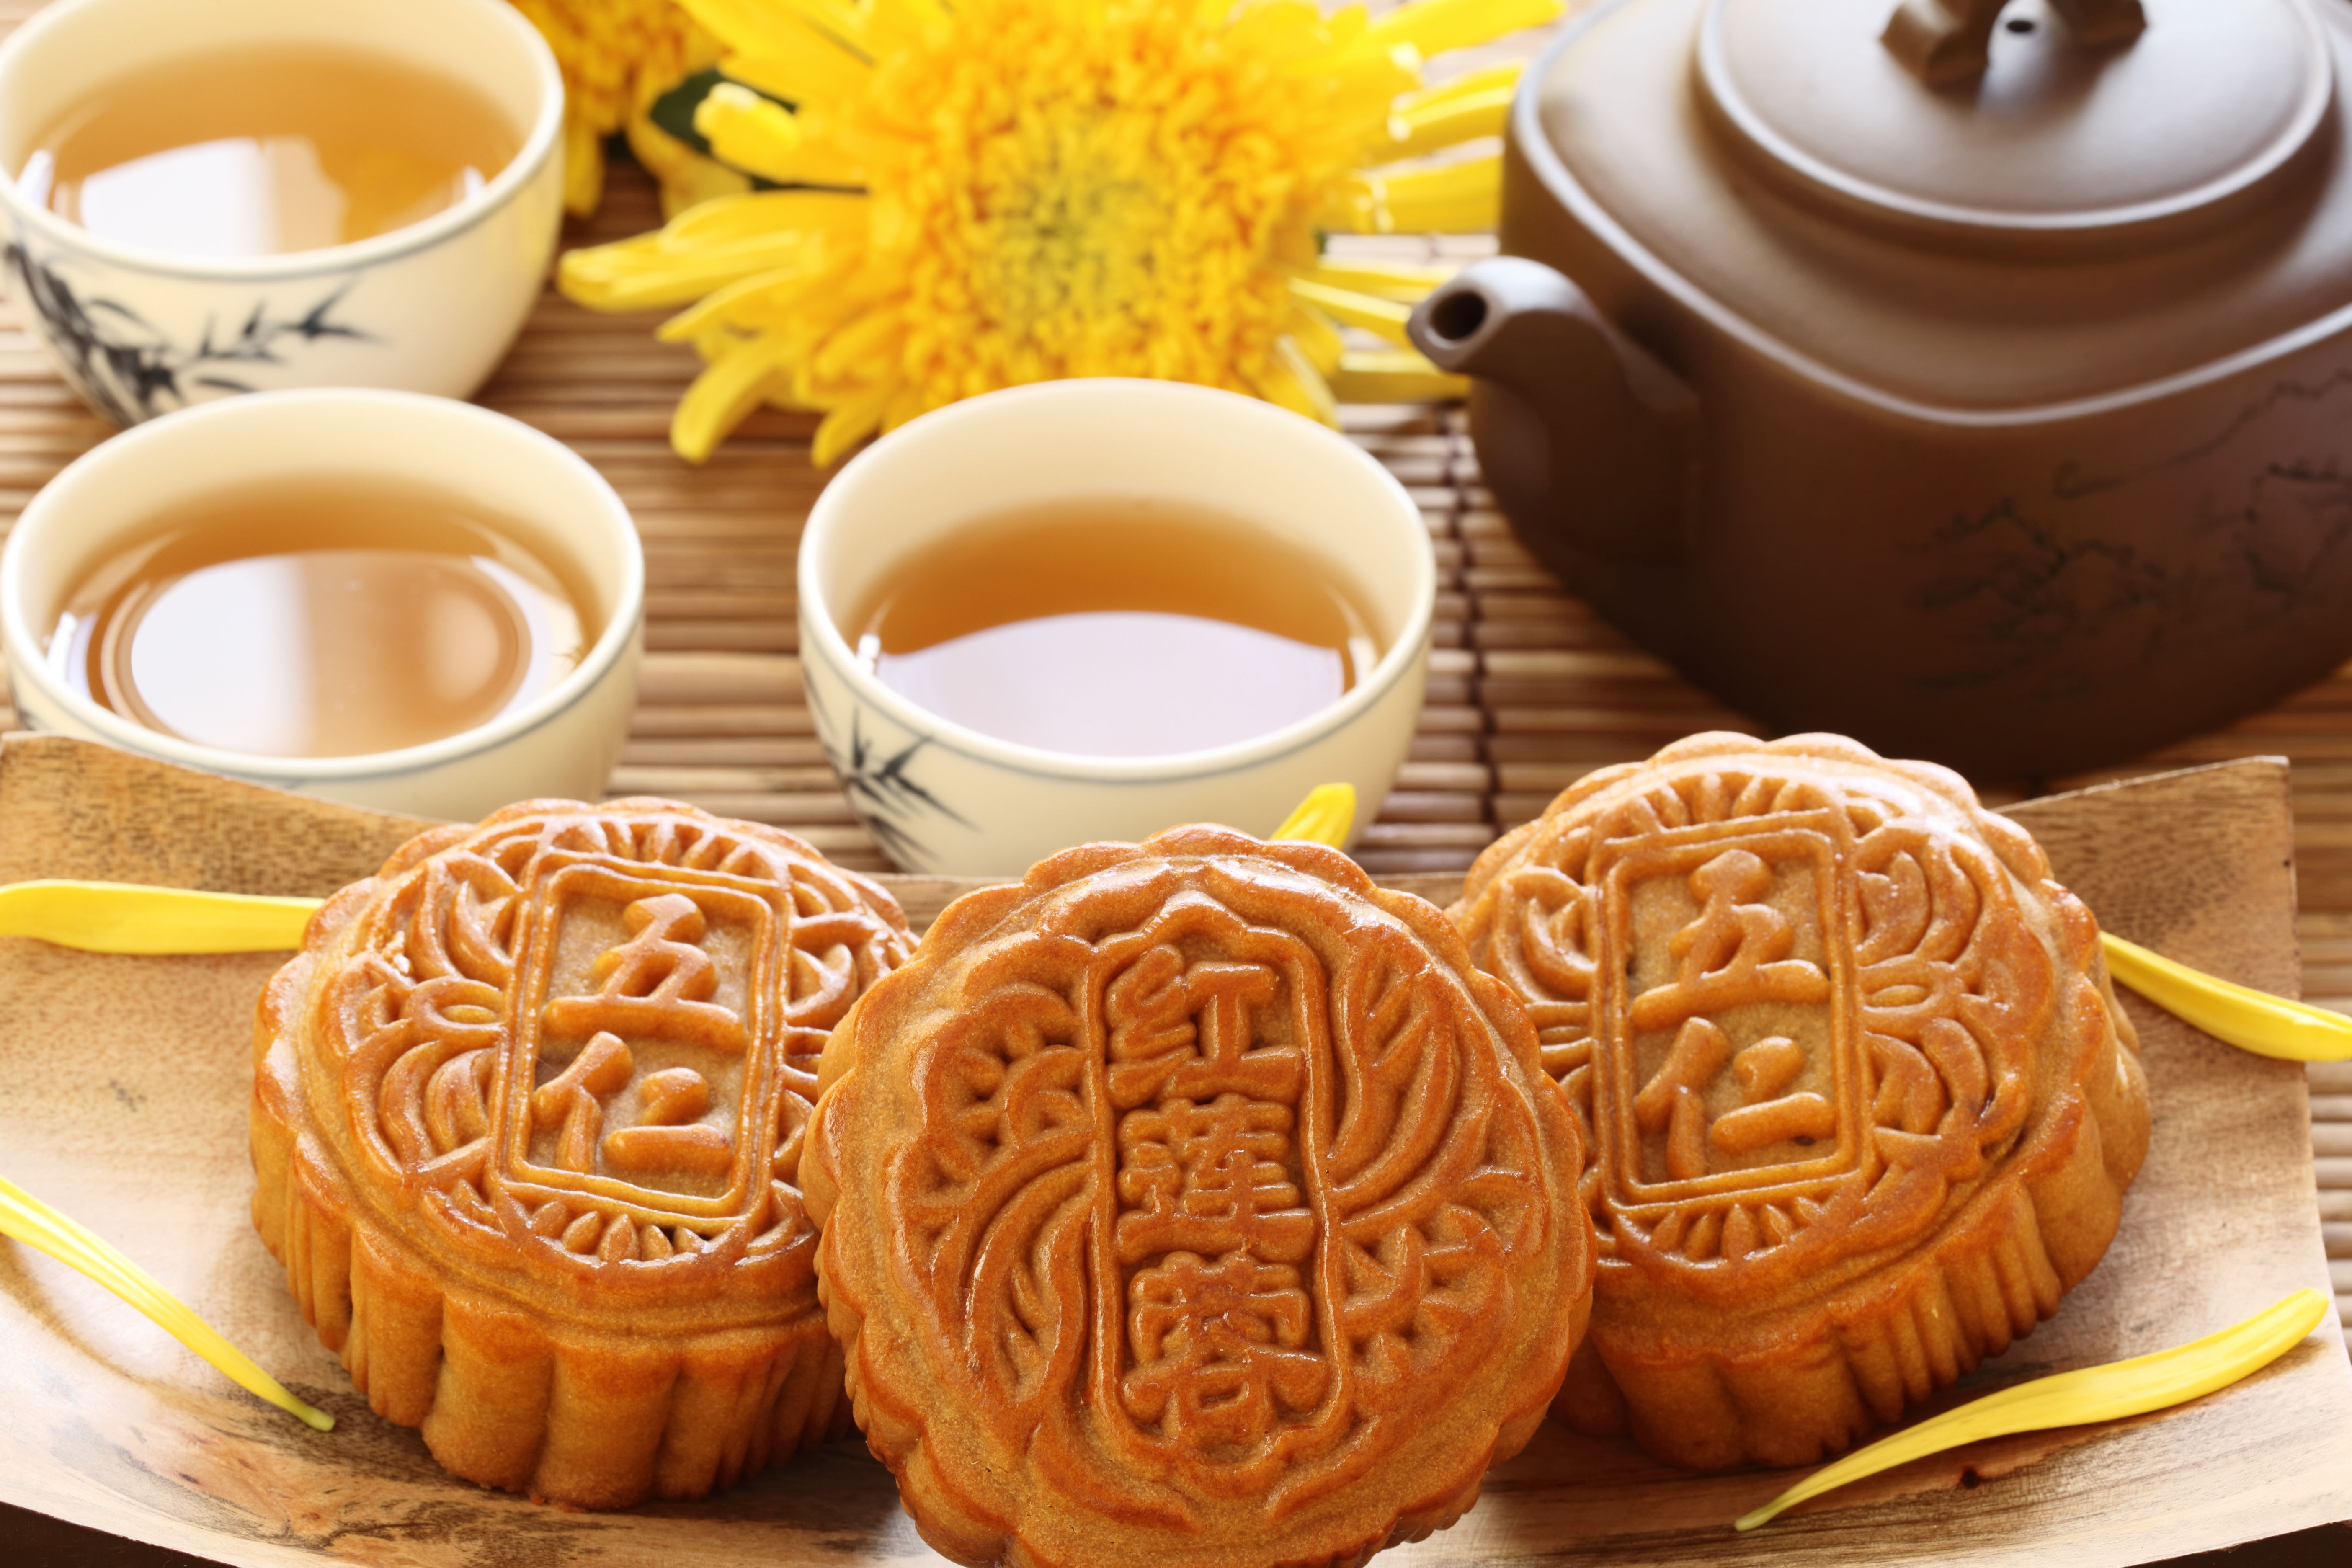 Biscuits HD Wallpaper. Moon cake, Cake festival, Chinese moon cake